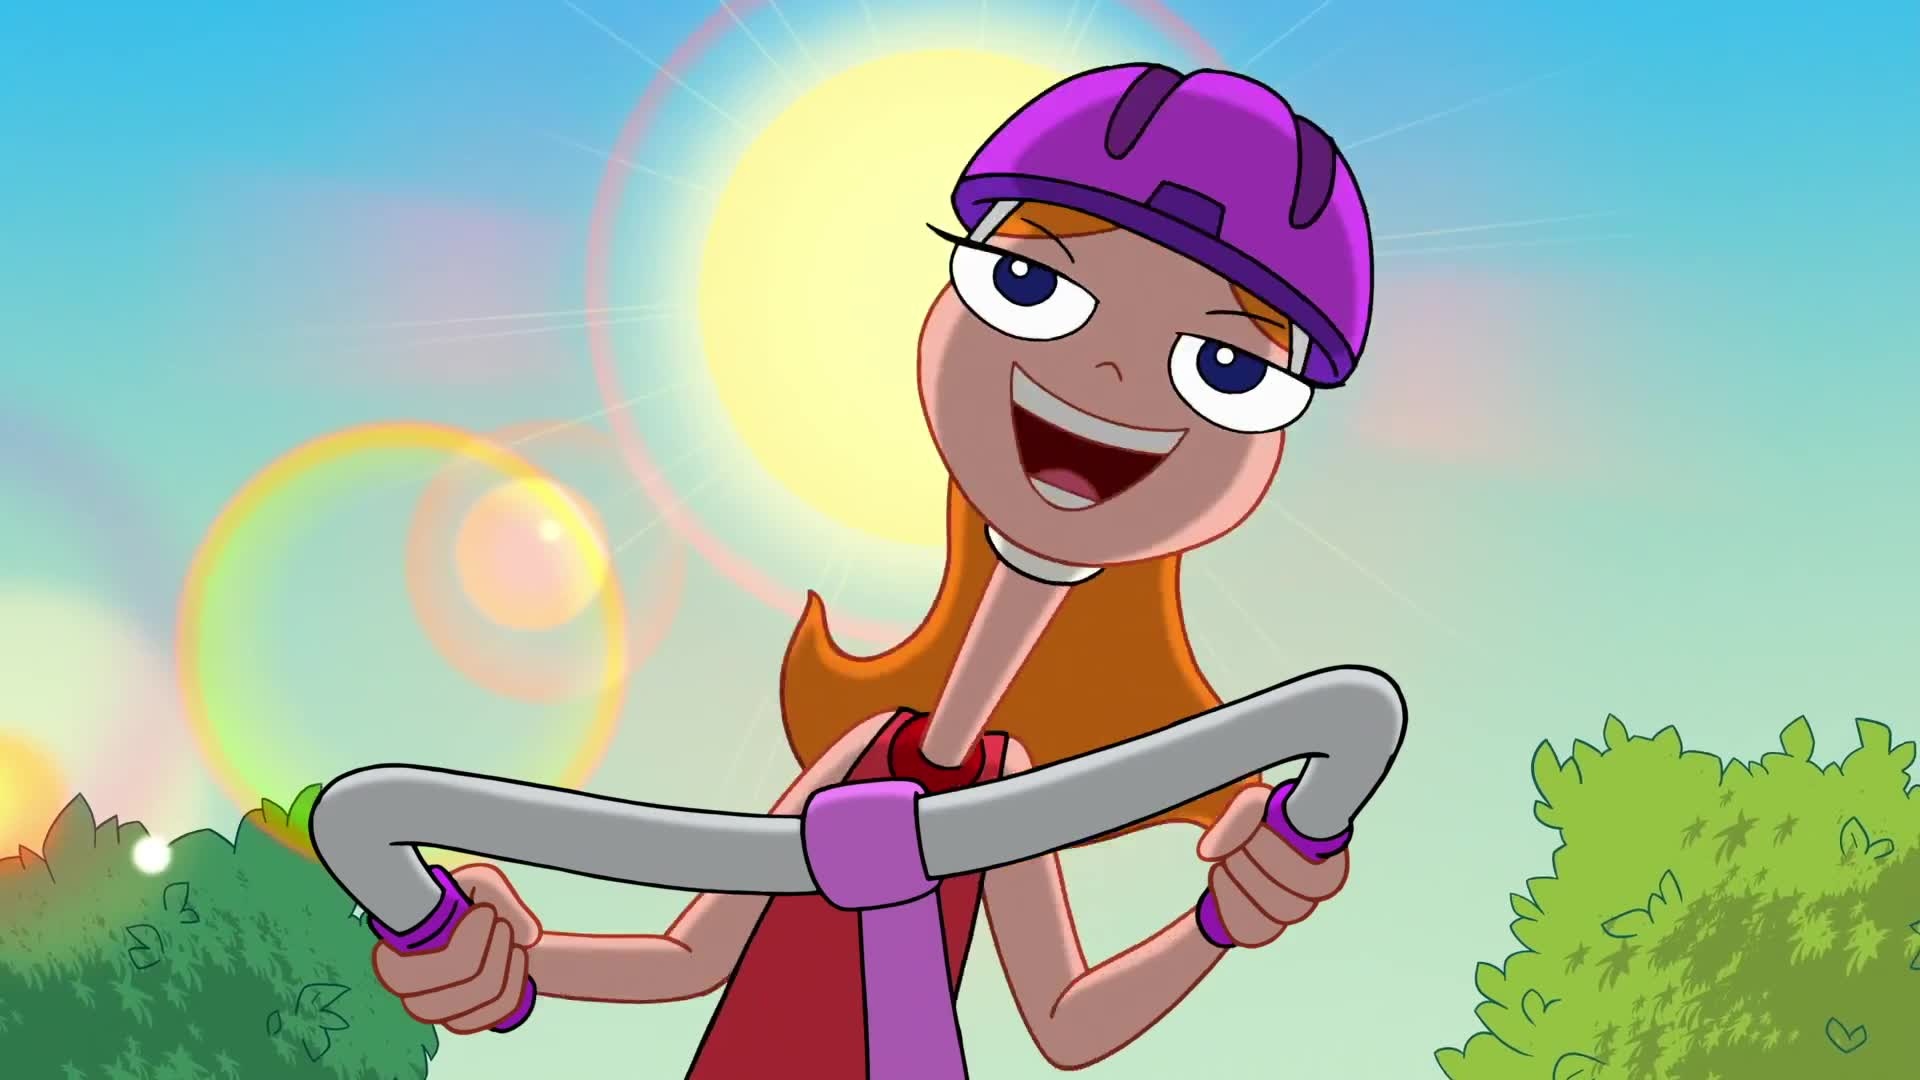 Phineas and Ferb movie wallpapers, Release date, Details, 1920x1080 Full HD Desktop